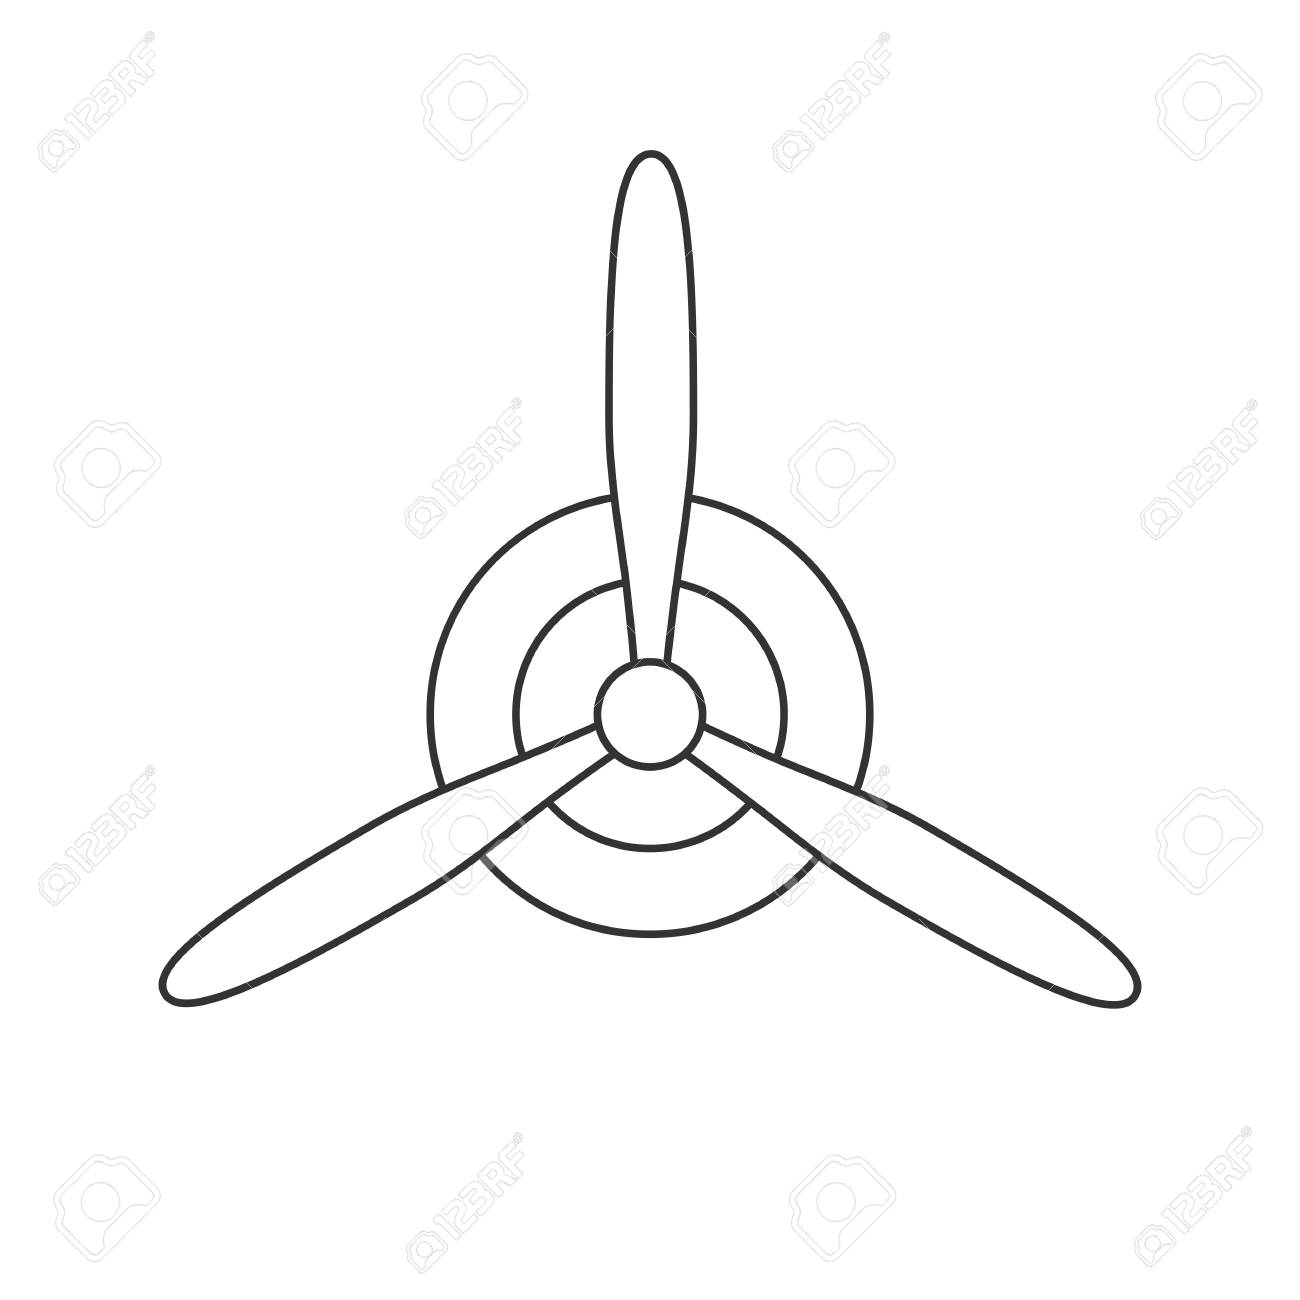 Albums 94+ Pictures How To Draw A Propeller Plane Sharp